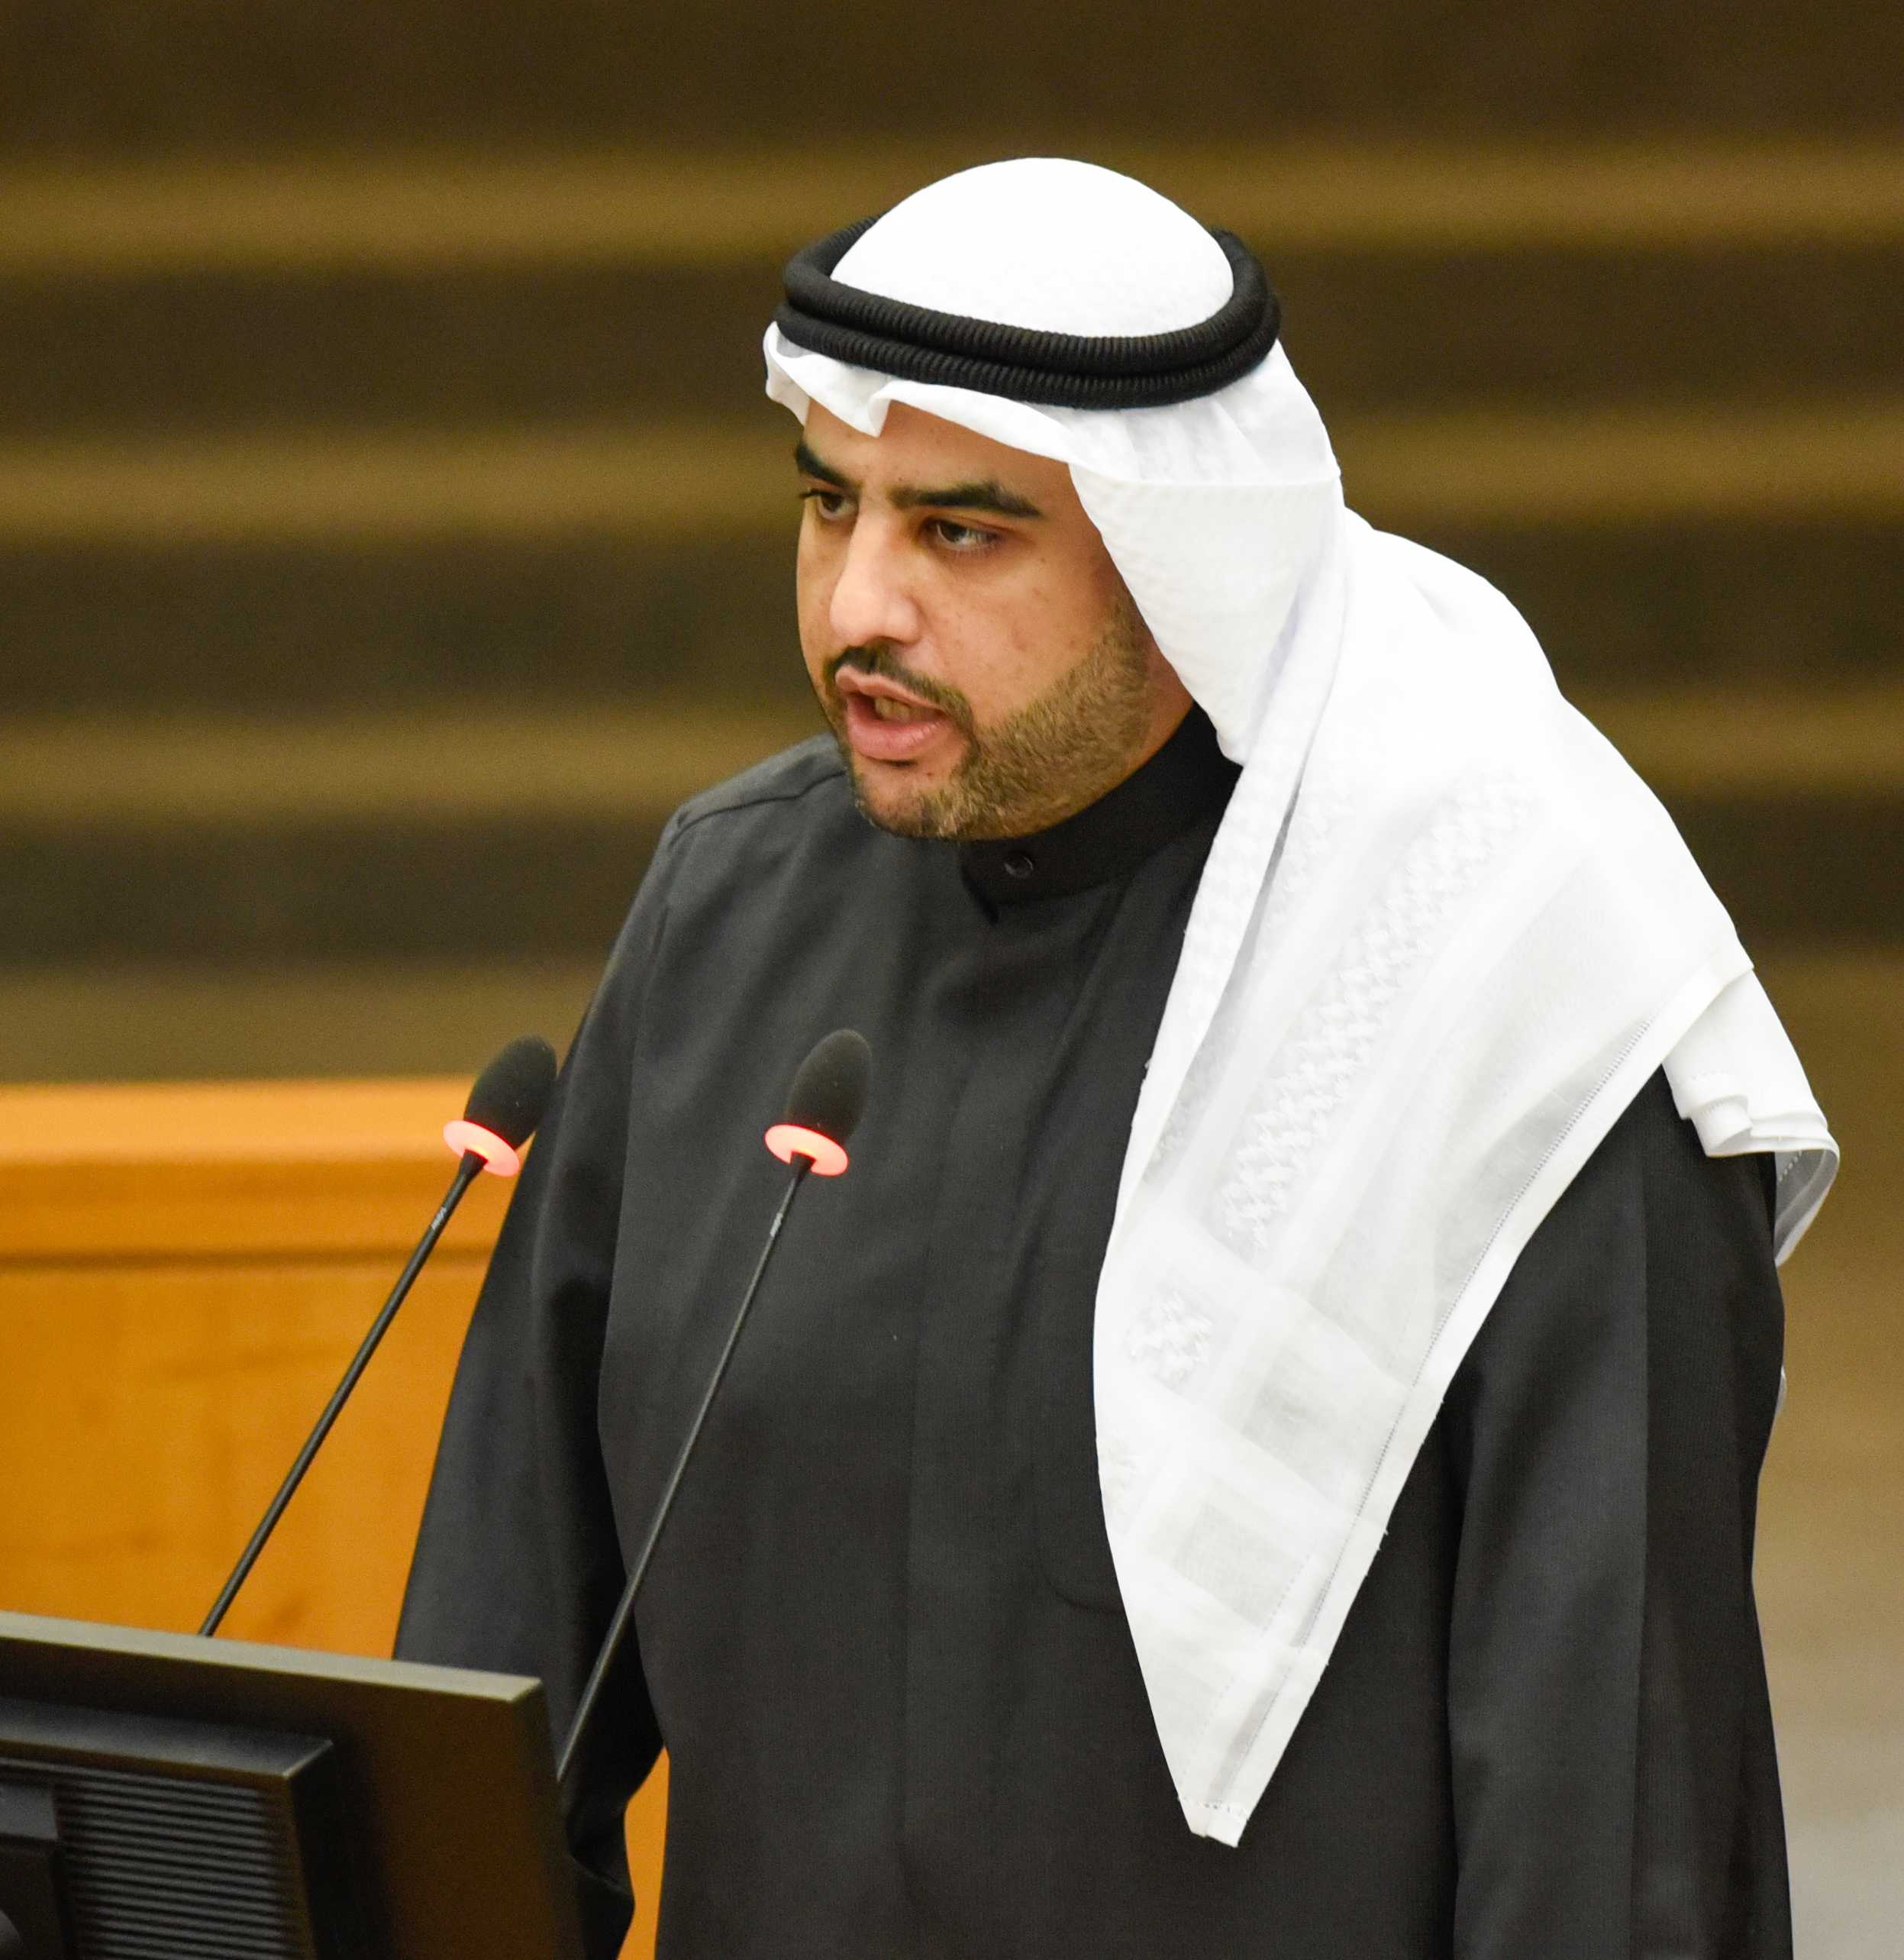 Kuwaiti Minister of Finance and Minister of State for Economic Affairs and Investment Abdulwahab Al-Rushaid